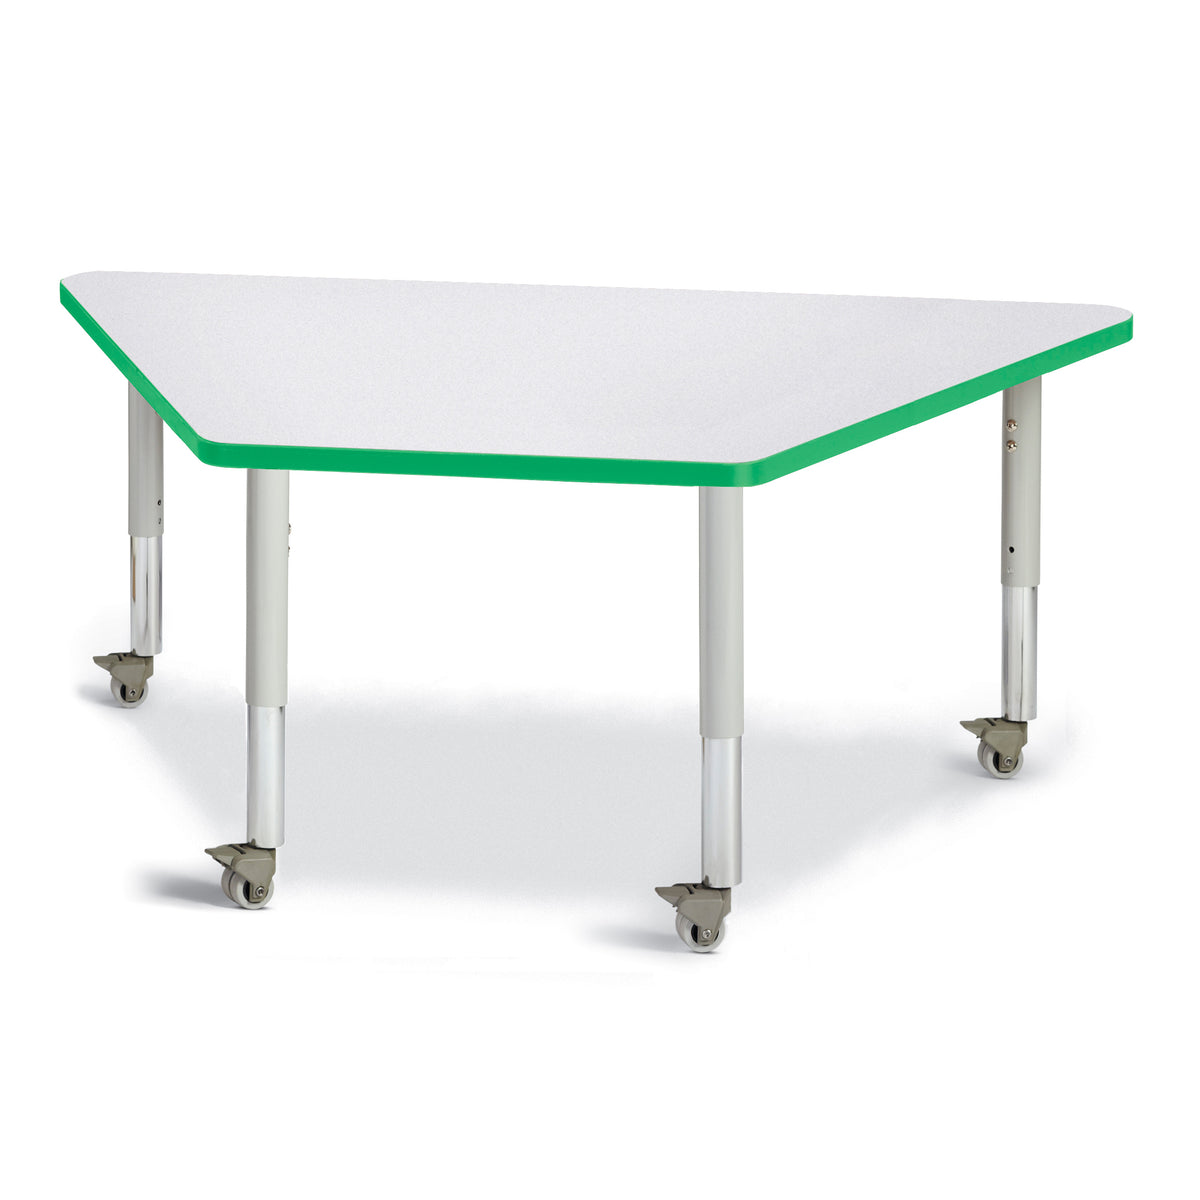 6443JCM119, Berries Trapezoid Activity Tables - 30" X 60", Mobile - Freckled Gray/Green/Gray